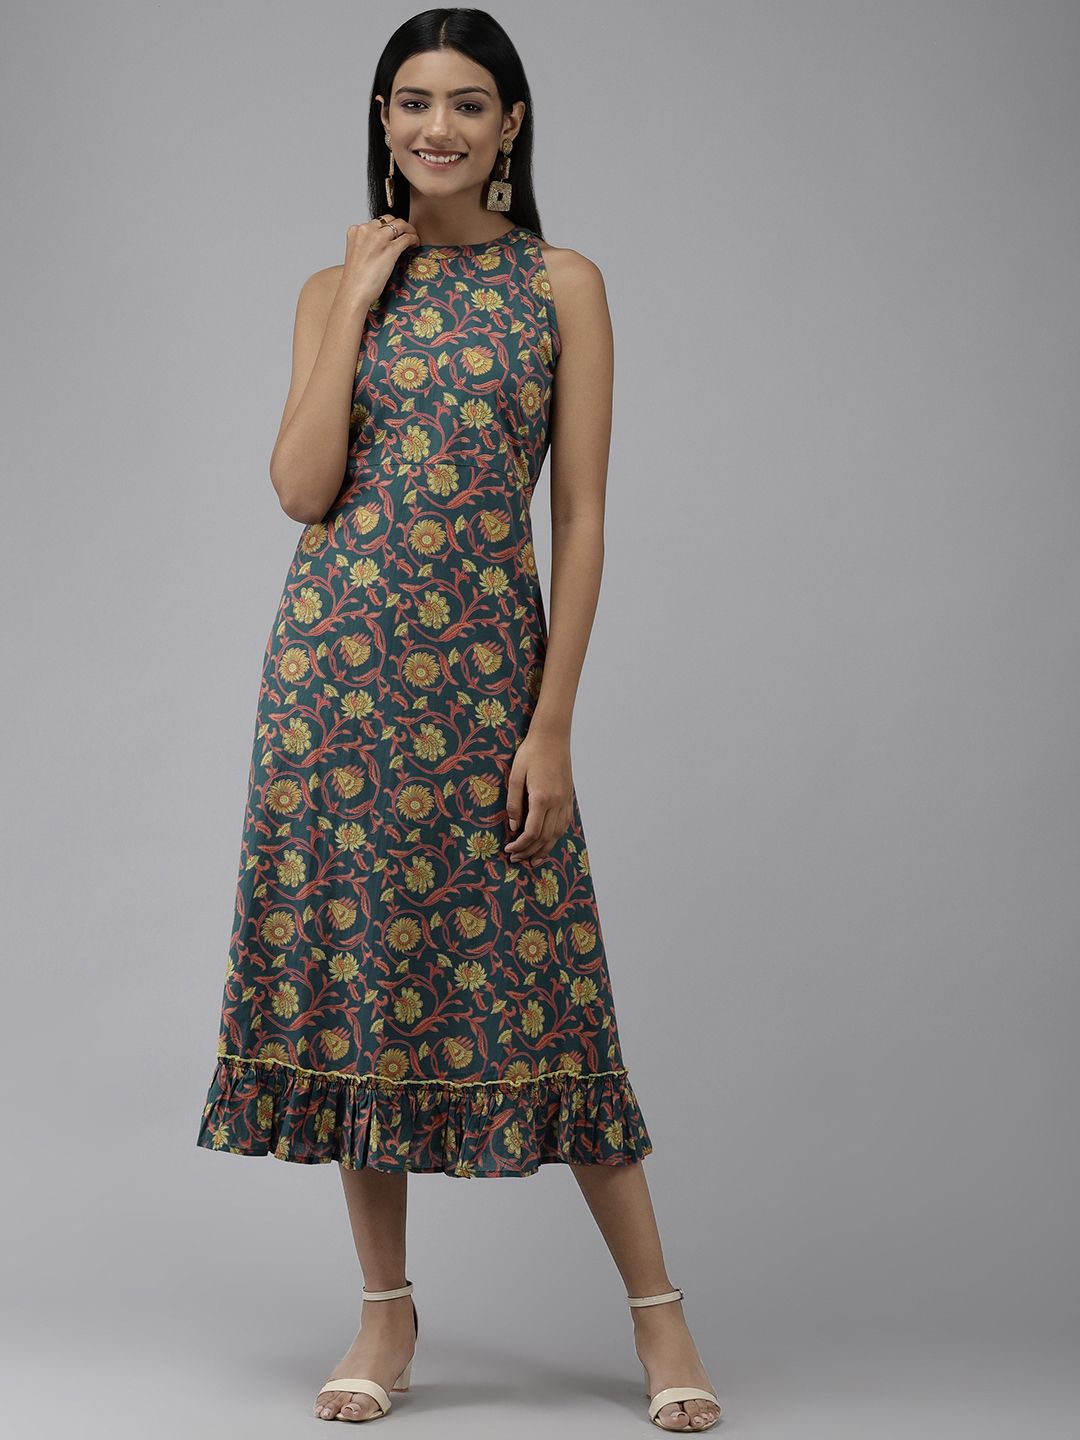 Yufta Teal Floral Ethnic A-Line Midi Dress Price in India